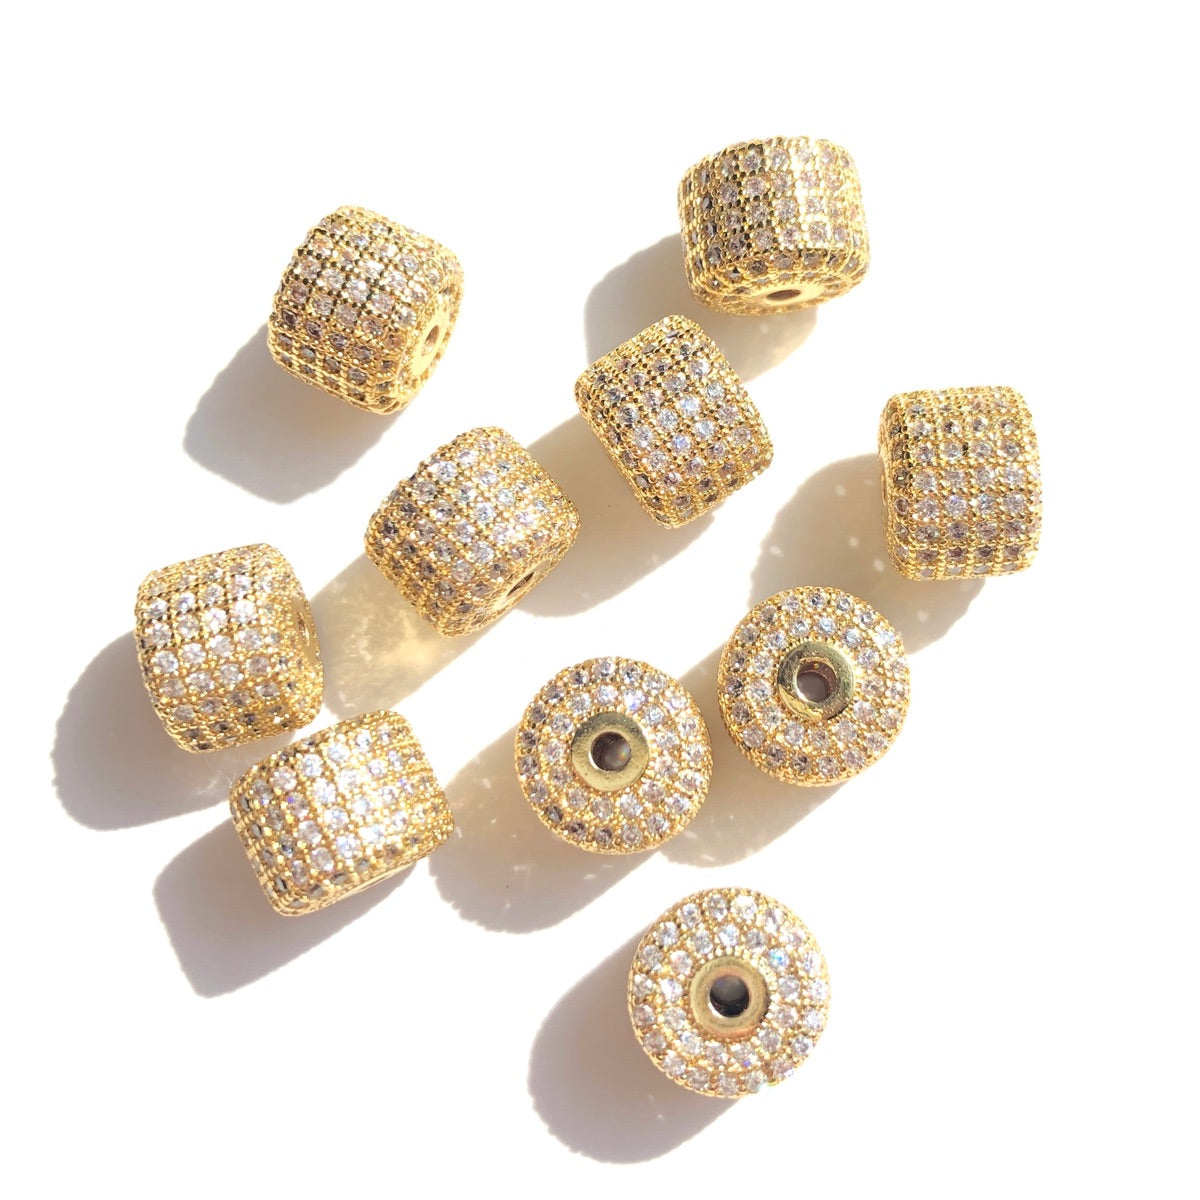 10-20pcs/lot 9.6*7.4mm CZ Paved Wheel Spacers Clear on Gold CZ Paved Spacers New Spacers Arrivals Rondelle Beads Charms Beads Beyond